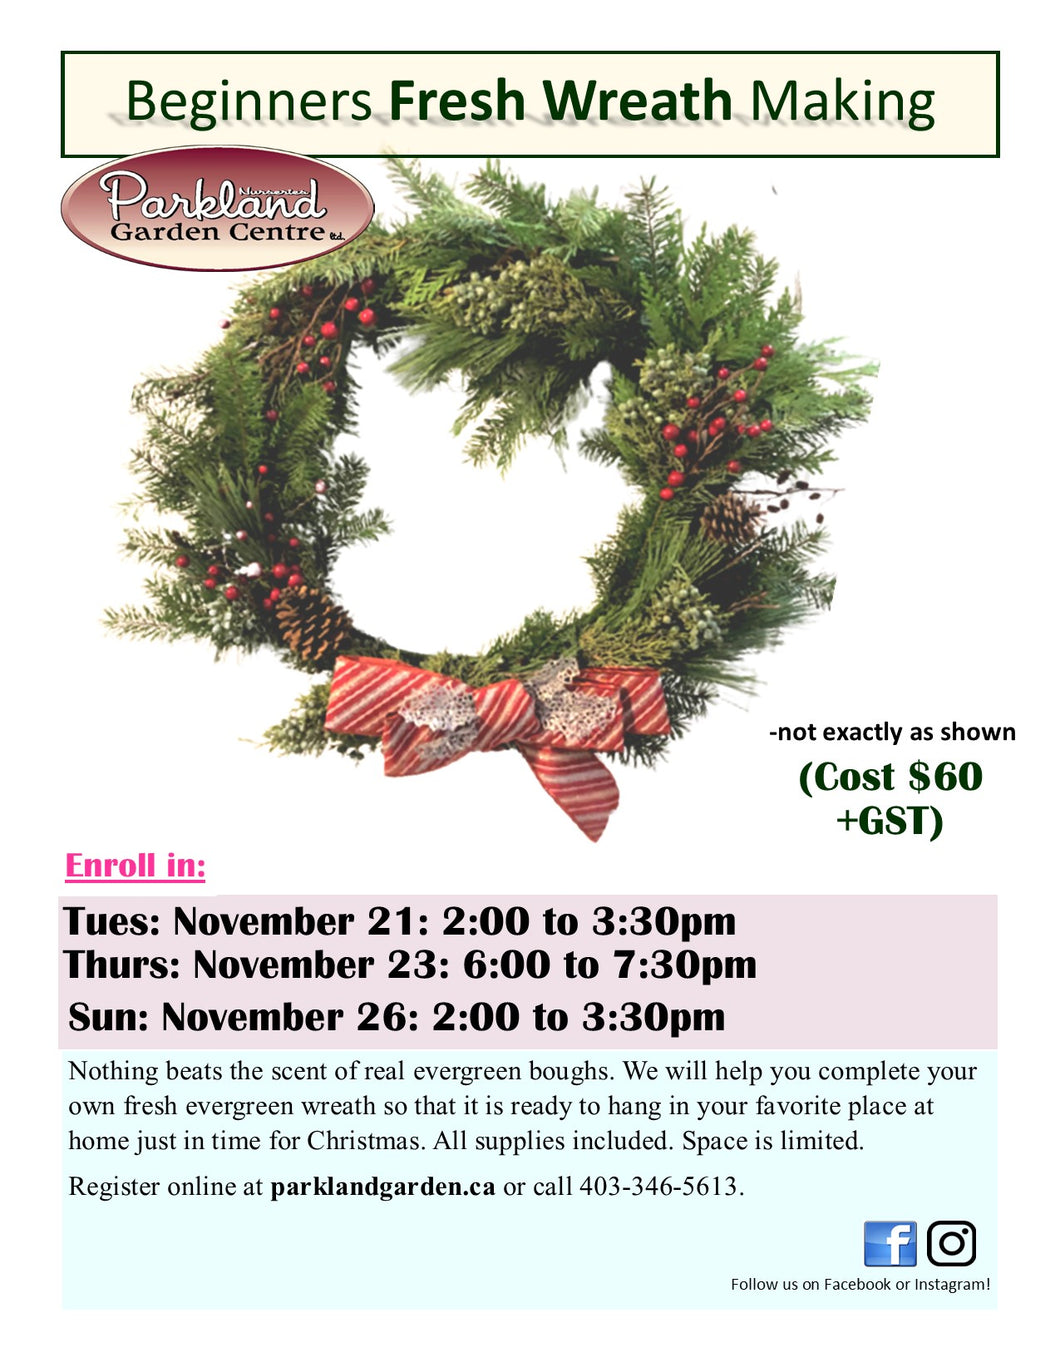 Beginners Fresh Wreath Workshop: Tuesday, Nov.21 from 2:00 to 3:30pm